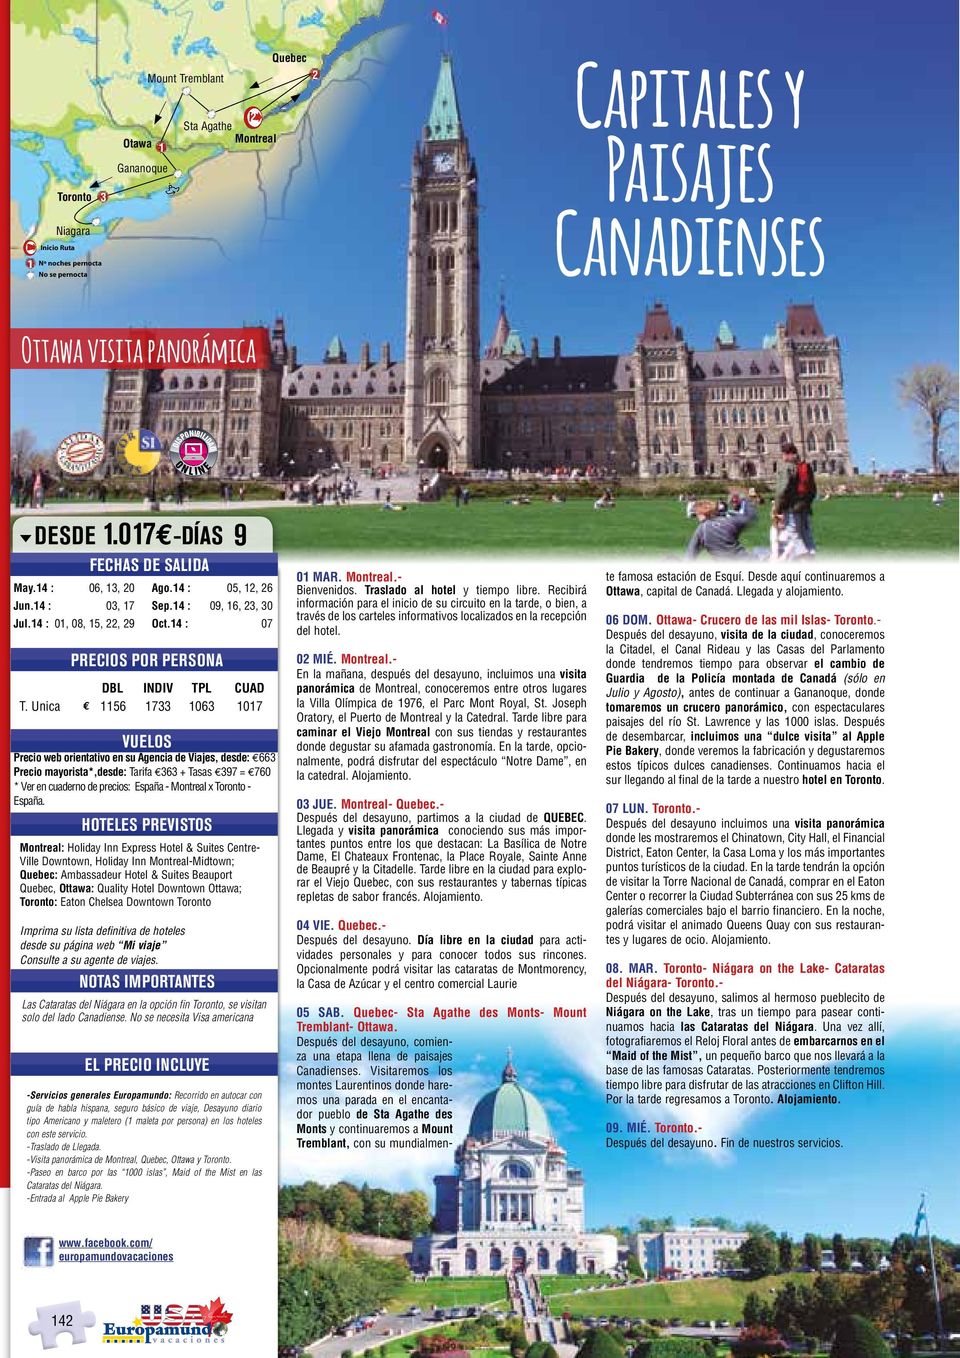 4 : 0, 08, 5,, 9 NOTAS IMPORTANTS 9 Montreal: Holiday Inn xpress Hotel & Suites Centre- Ville Downtown, Holiday Inn Montreal-Midtown; Quebec: Ambassadeur Hotel & Suites Beauport Quebec, Ottawa: